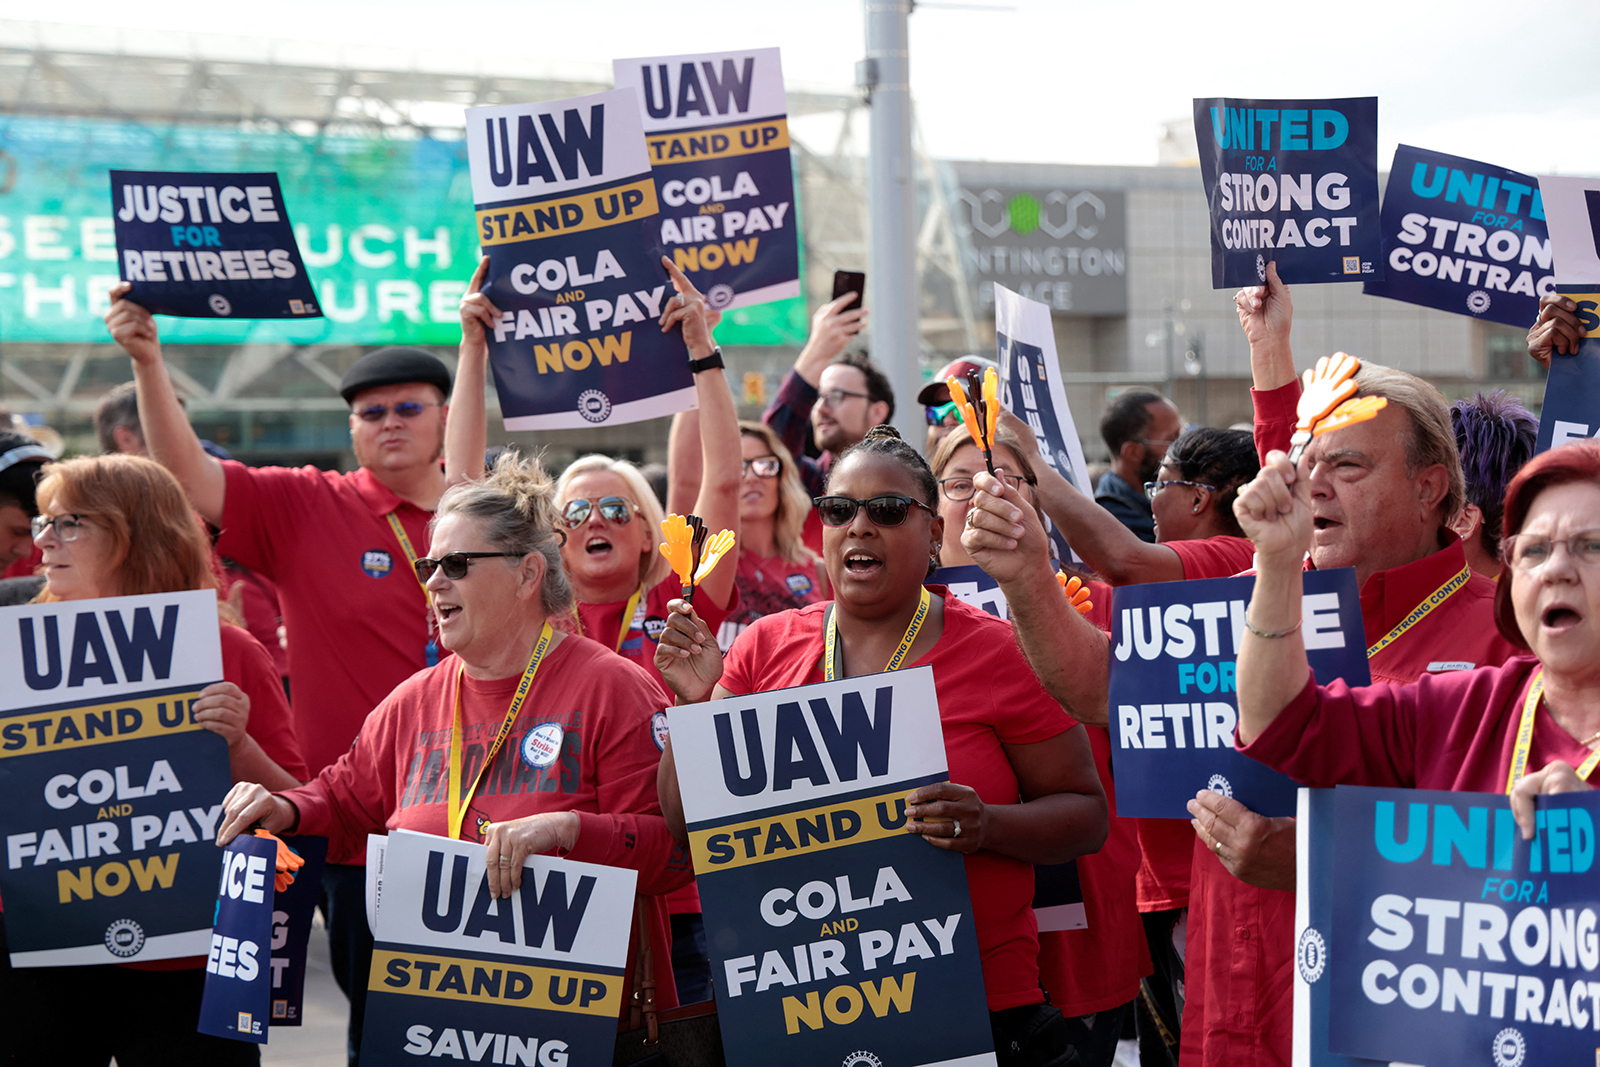 United Auto Workers from Louisville, Kentucky, rally in support of striking UAW members, in Detroit, Michigan, on September 15.